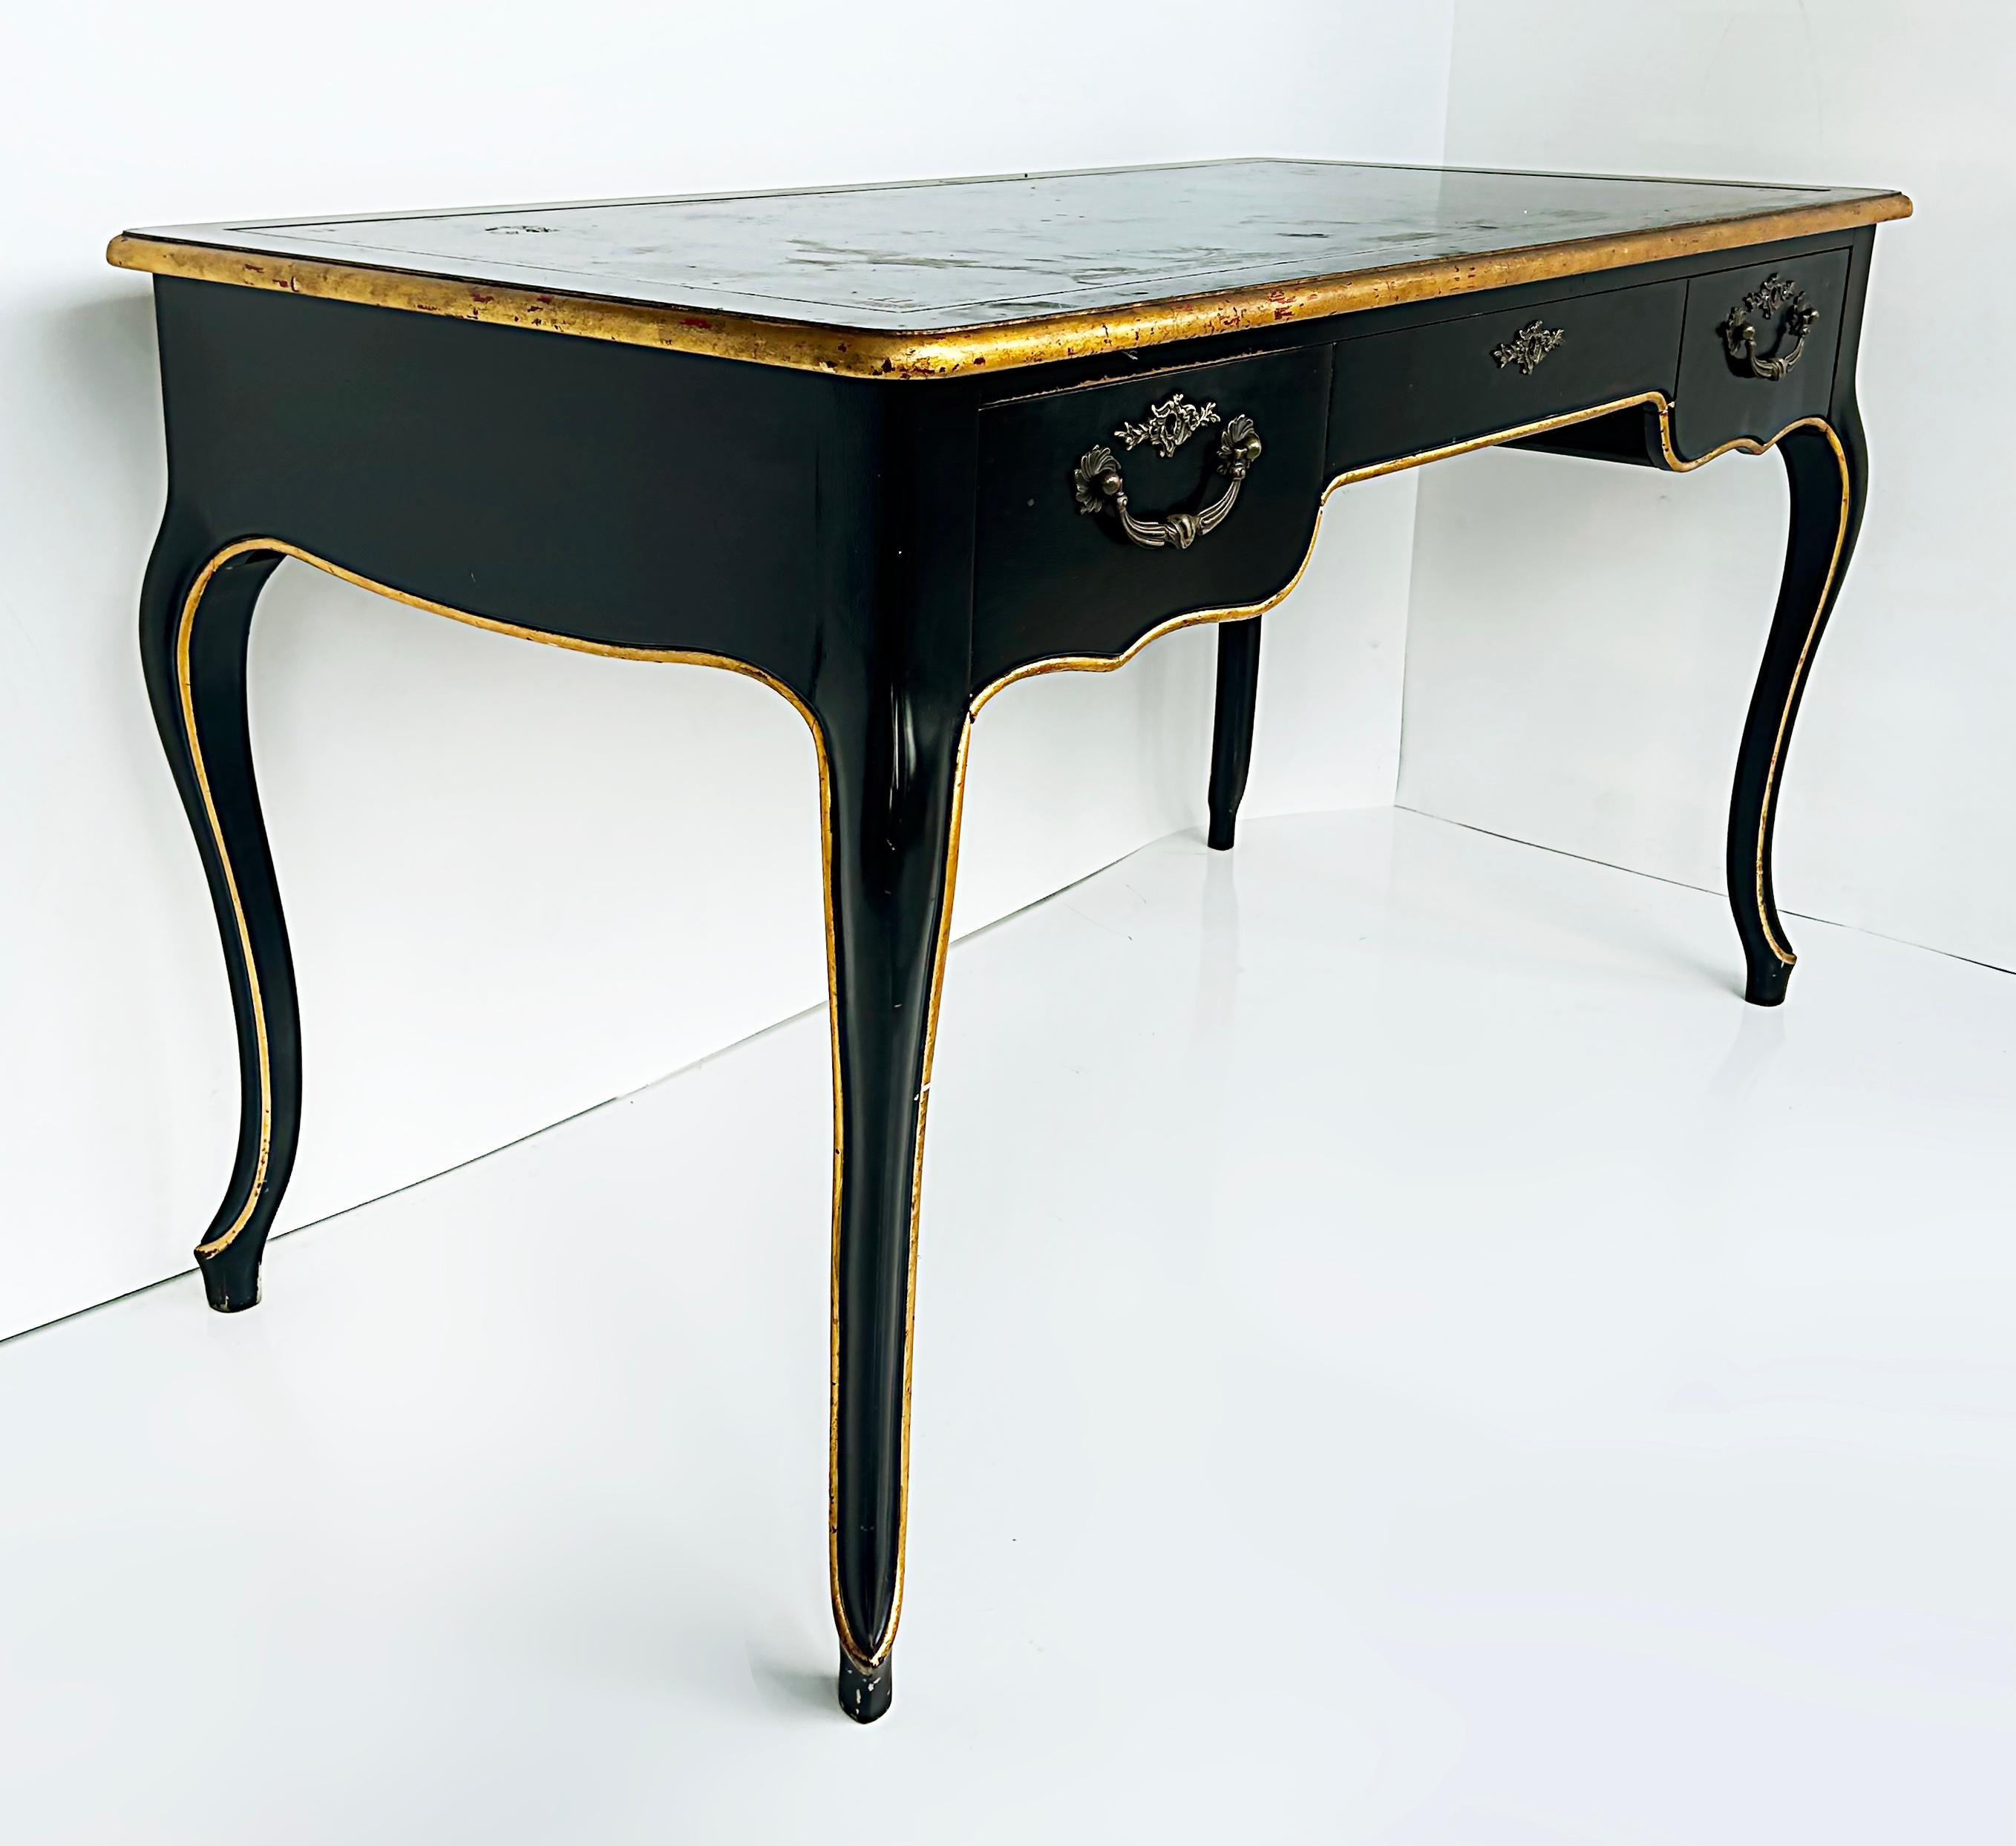 Vintage Baker Writing Desk, Ebonized Parcel Gilt with Leather Embossed

Offered for sale is a Baker Furniture Company writing desk in the French Bureau Plat Louis XV style. The desk has an ebonized parcel gilt finish with an embossed gilt leather